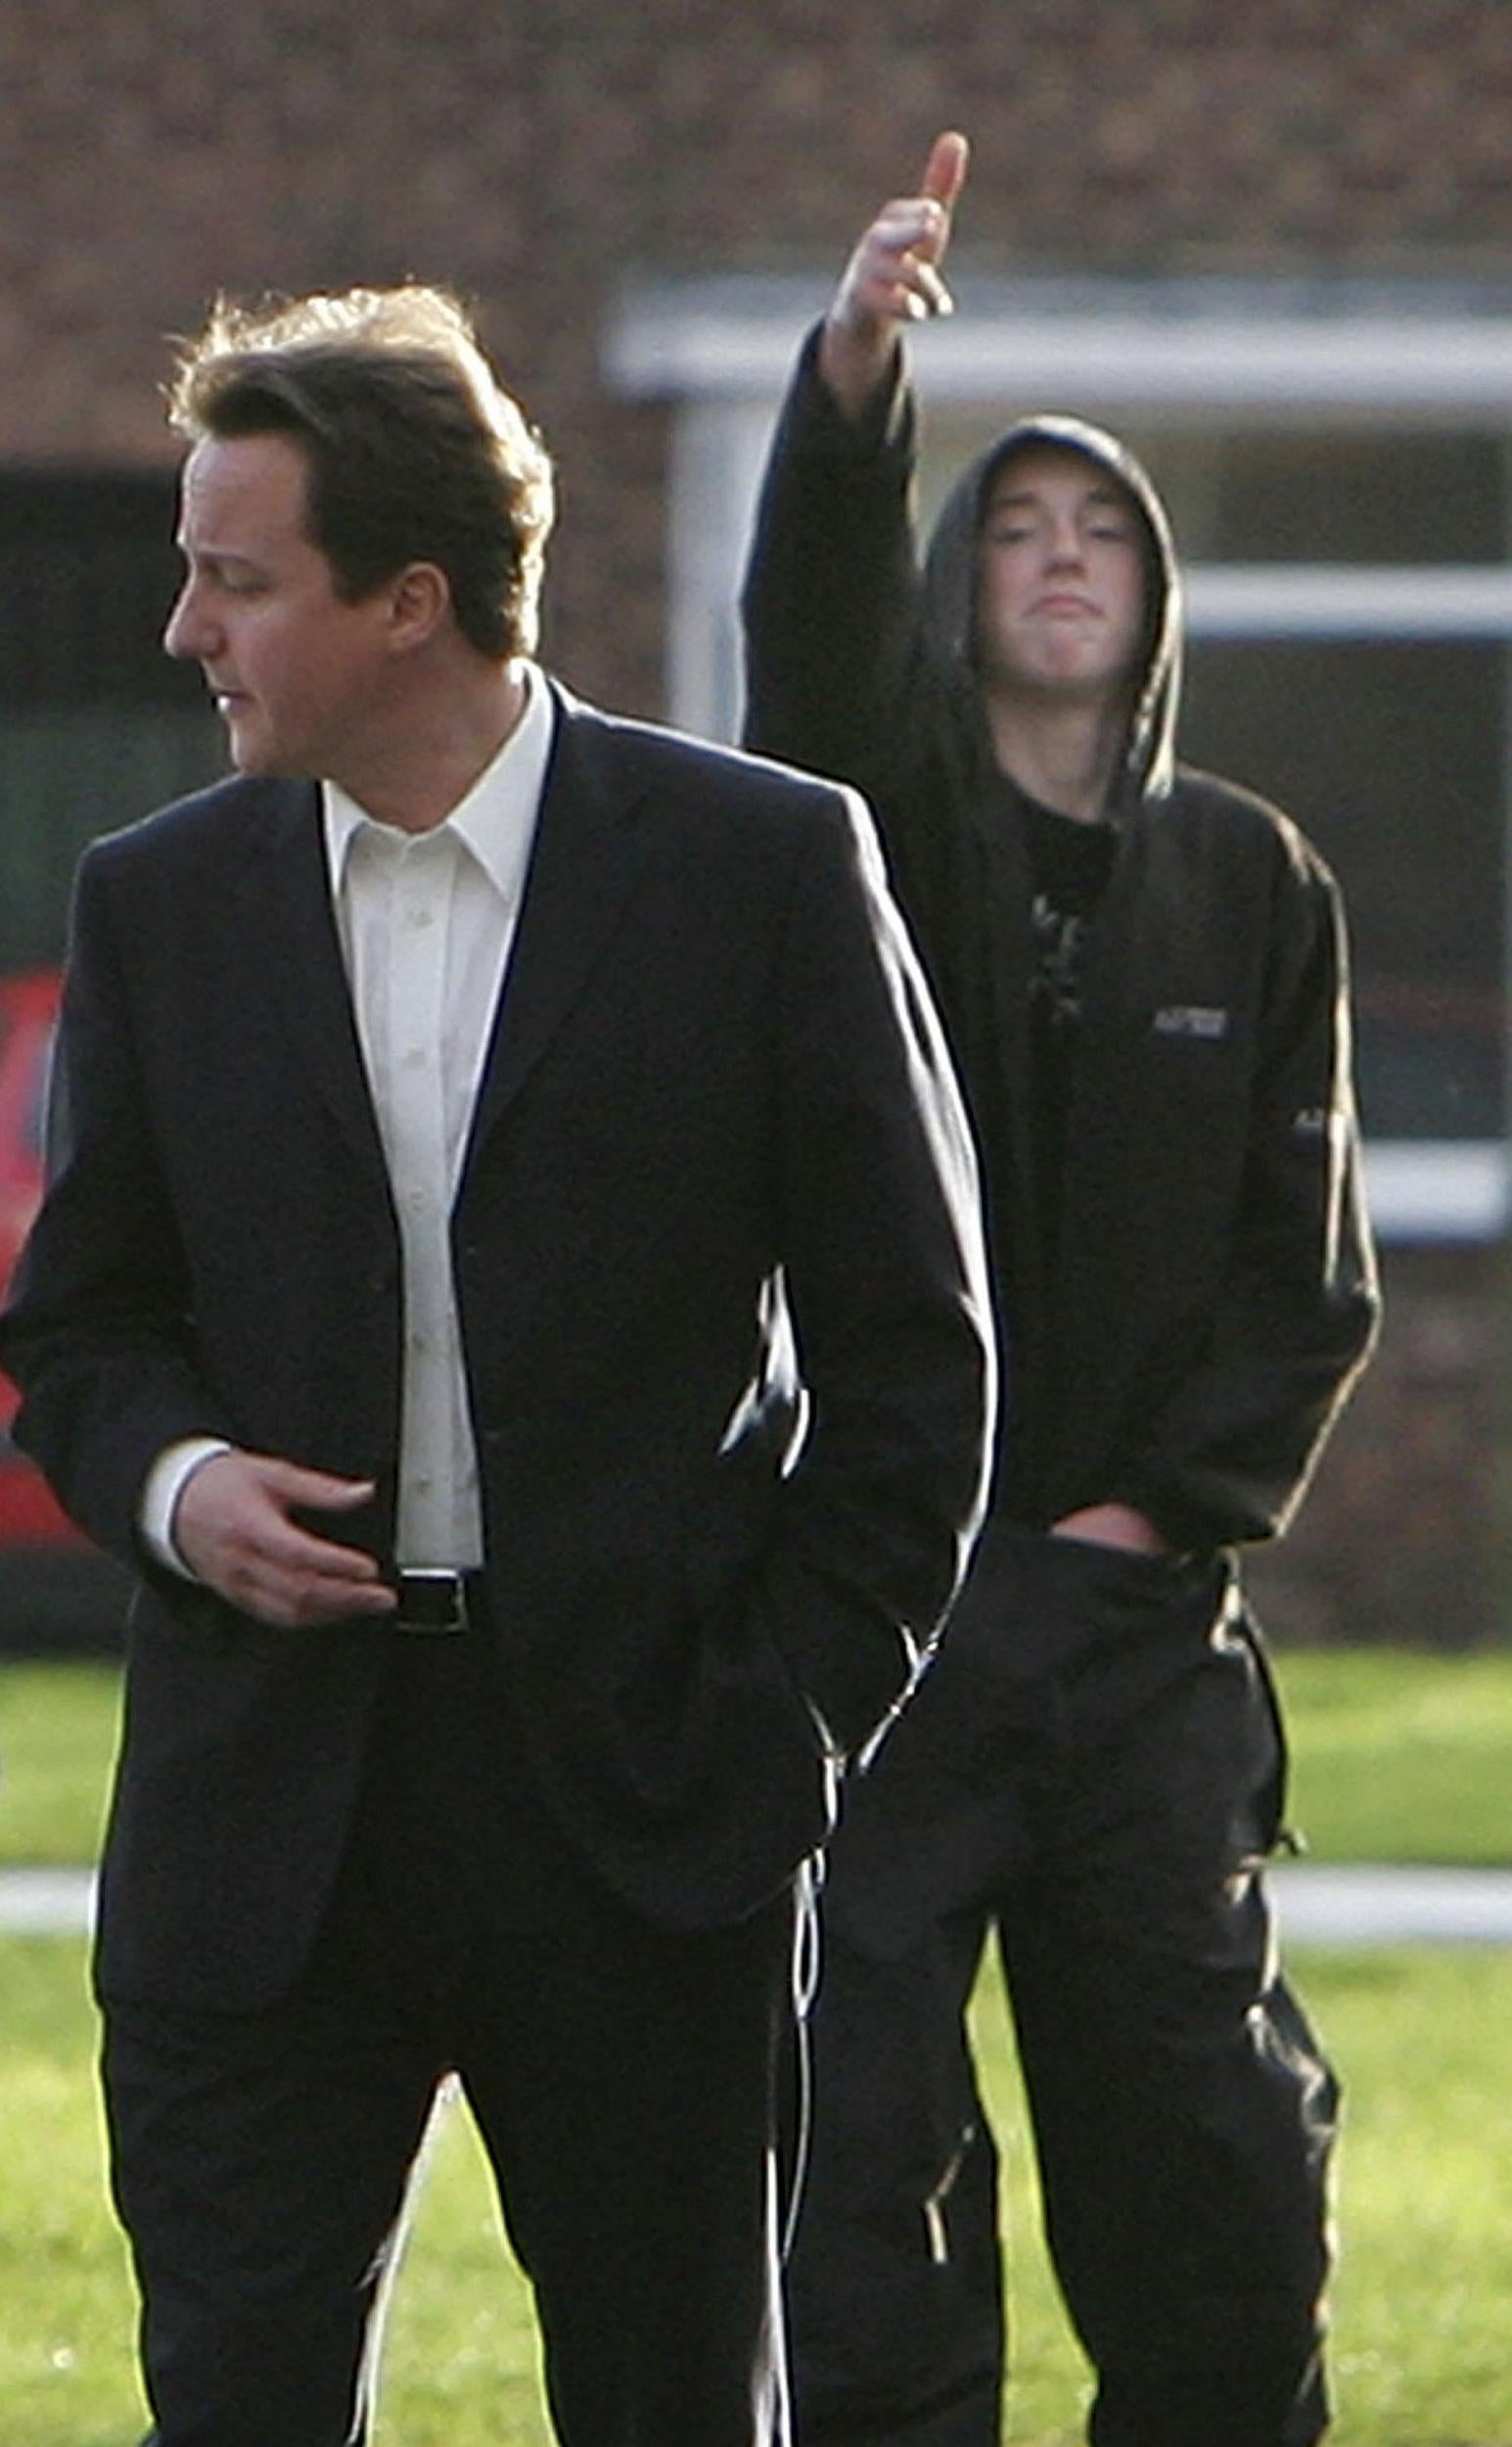 David Cameron is photobombed during a 2007 visit to Benchill estate in Manchester